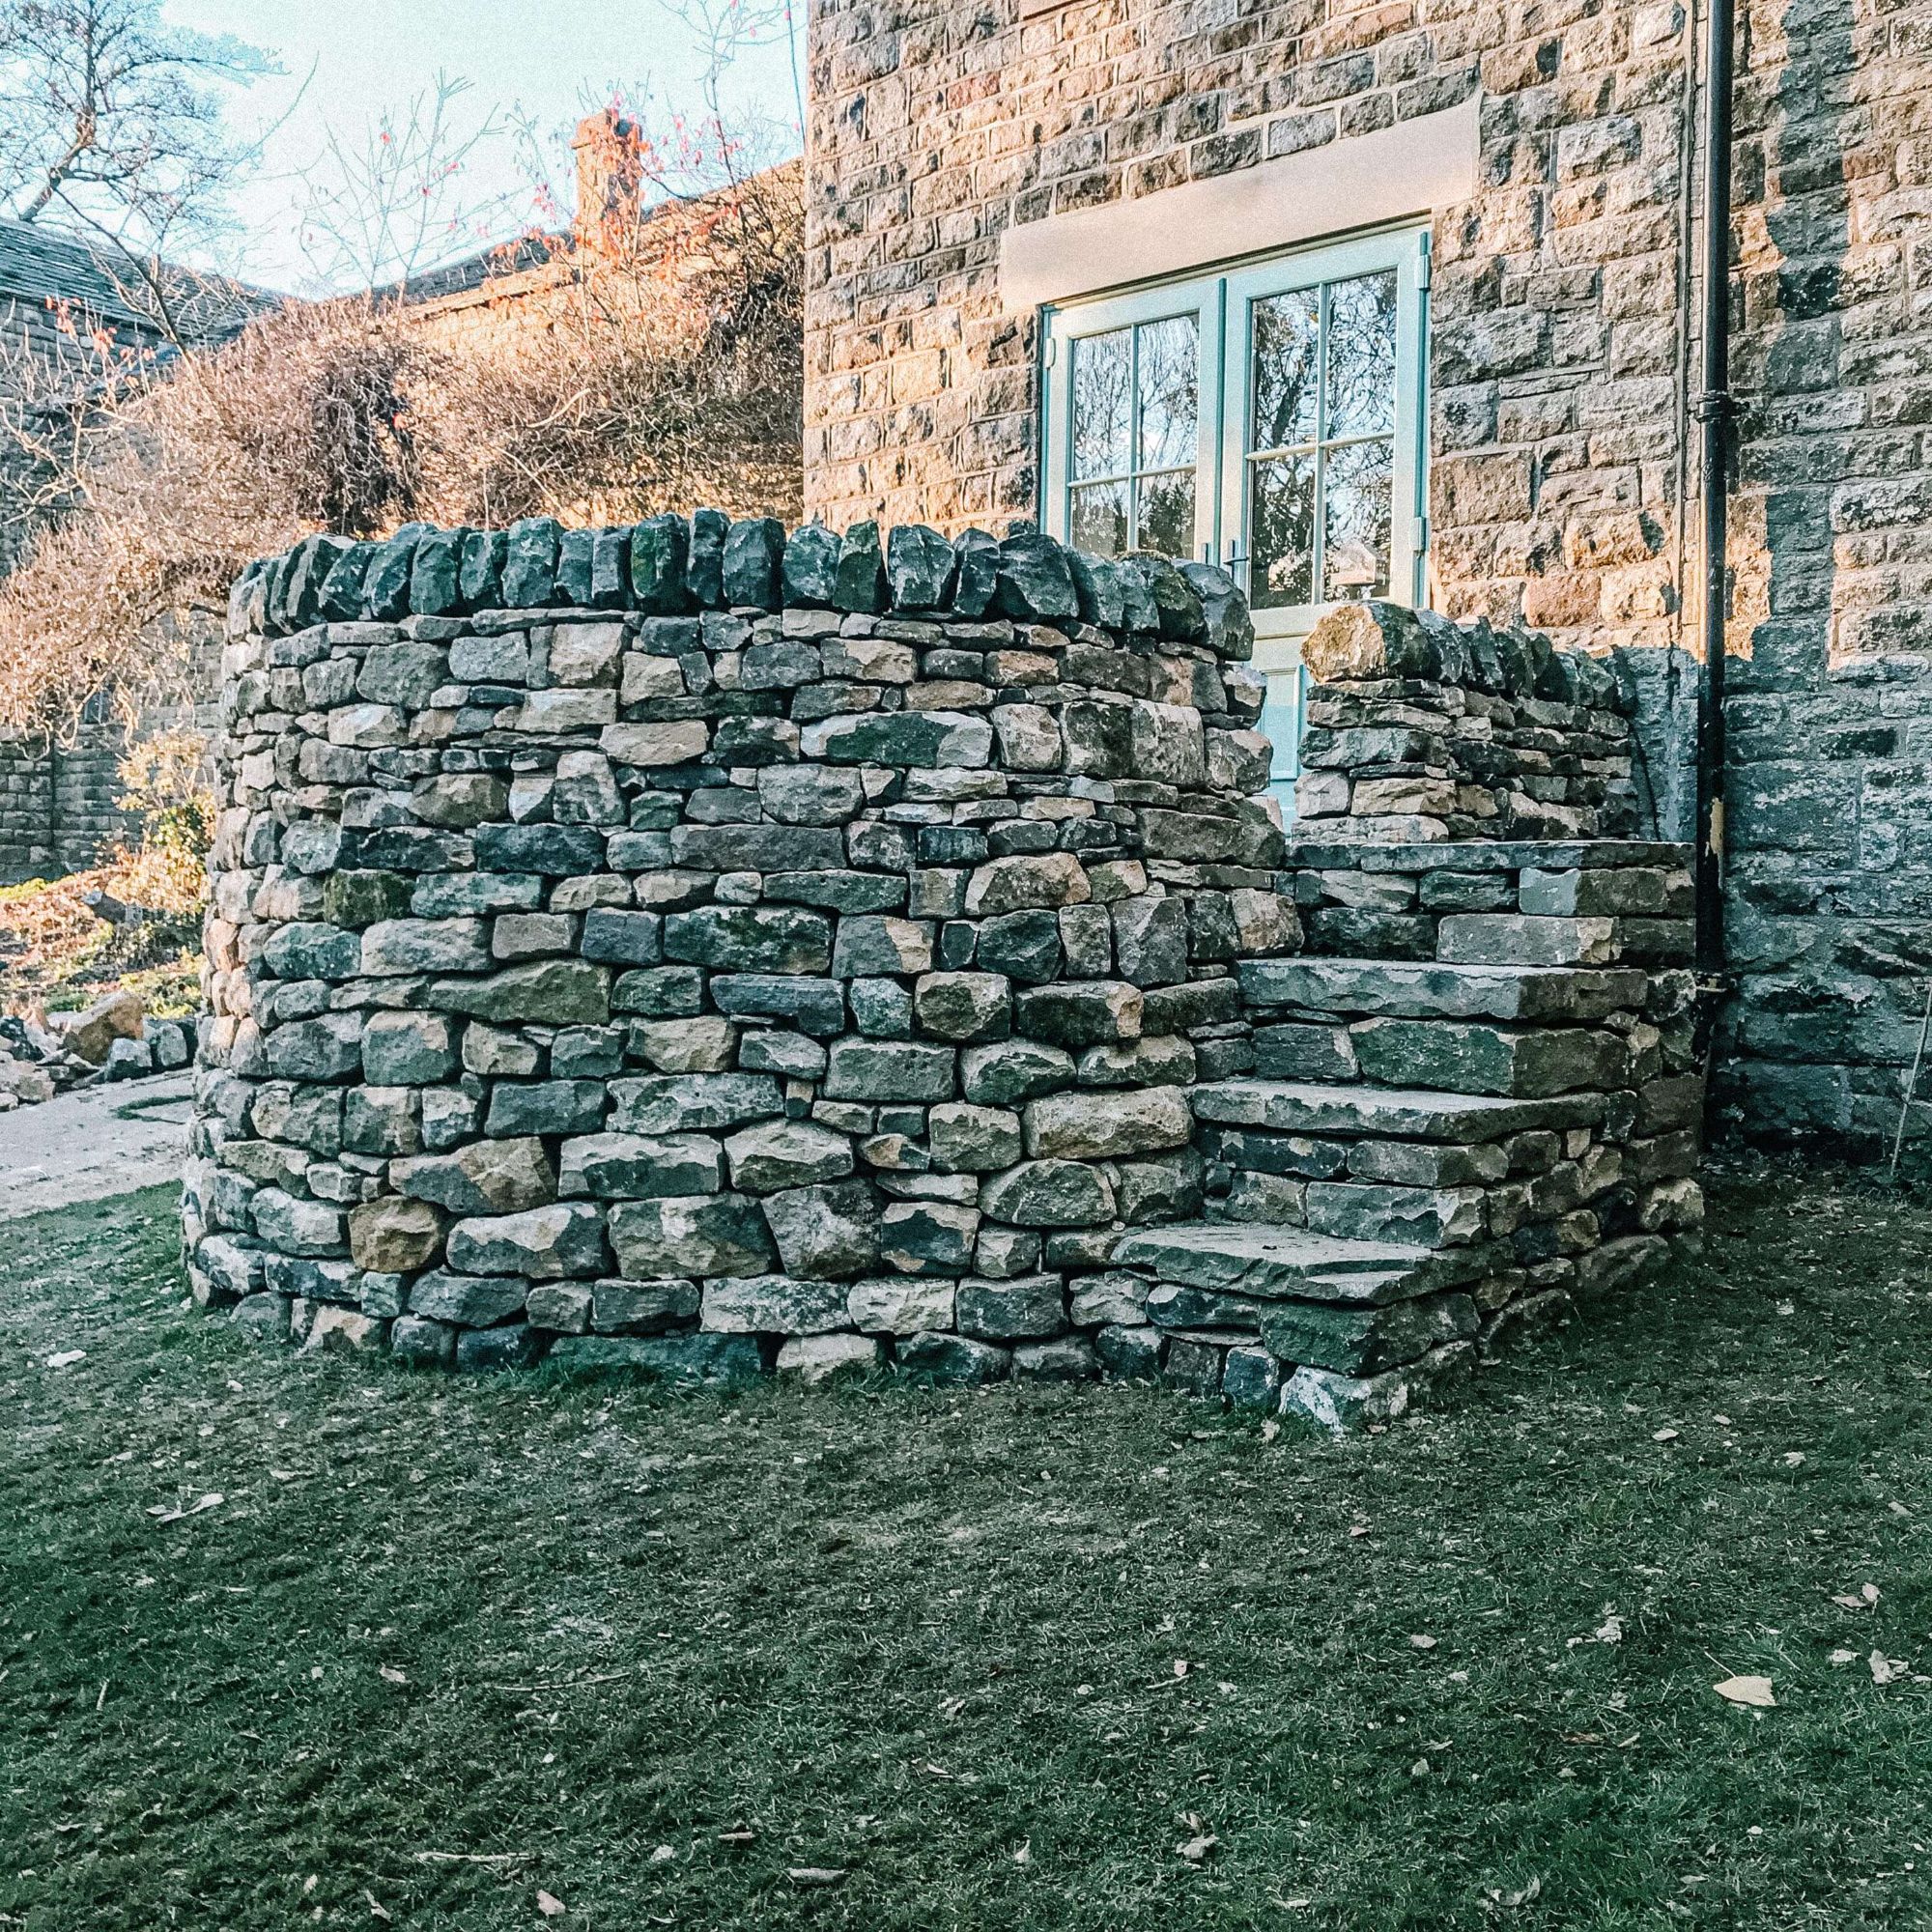 Dry stone walling - A circular dry stone wall with steps in Chesterfield